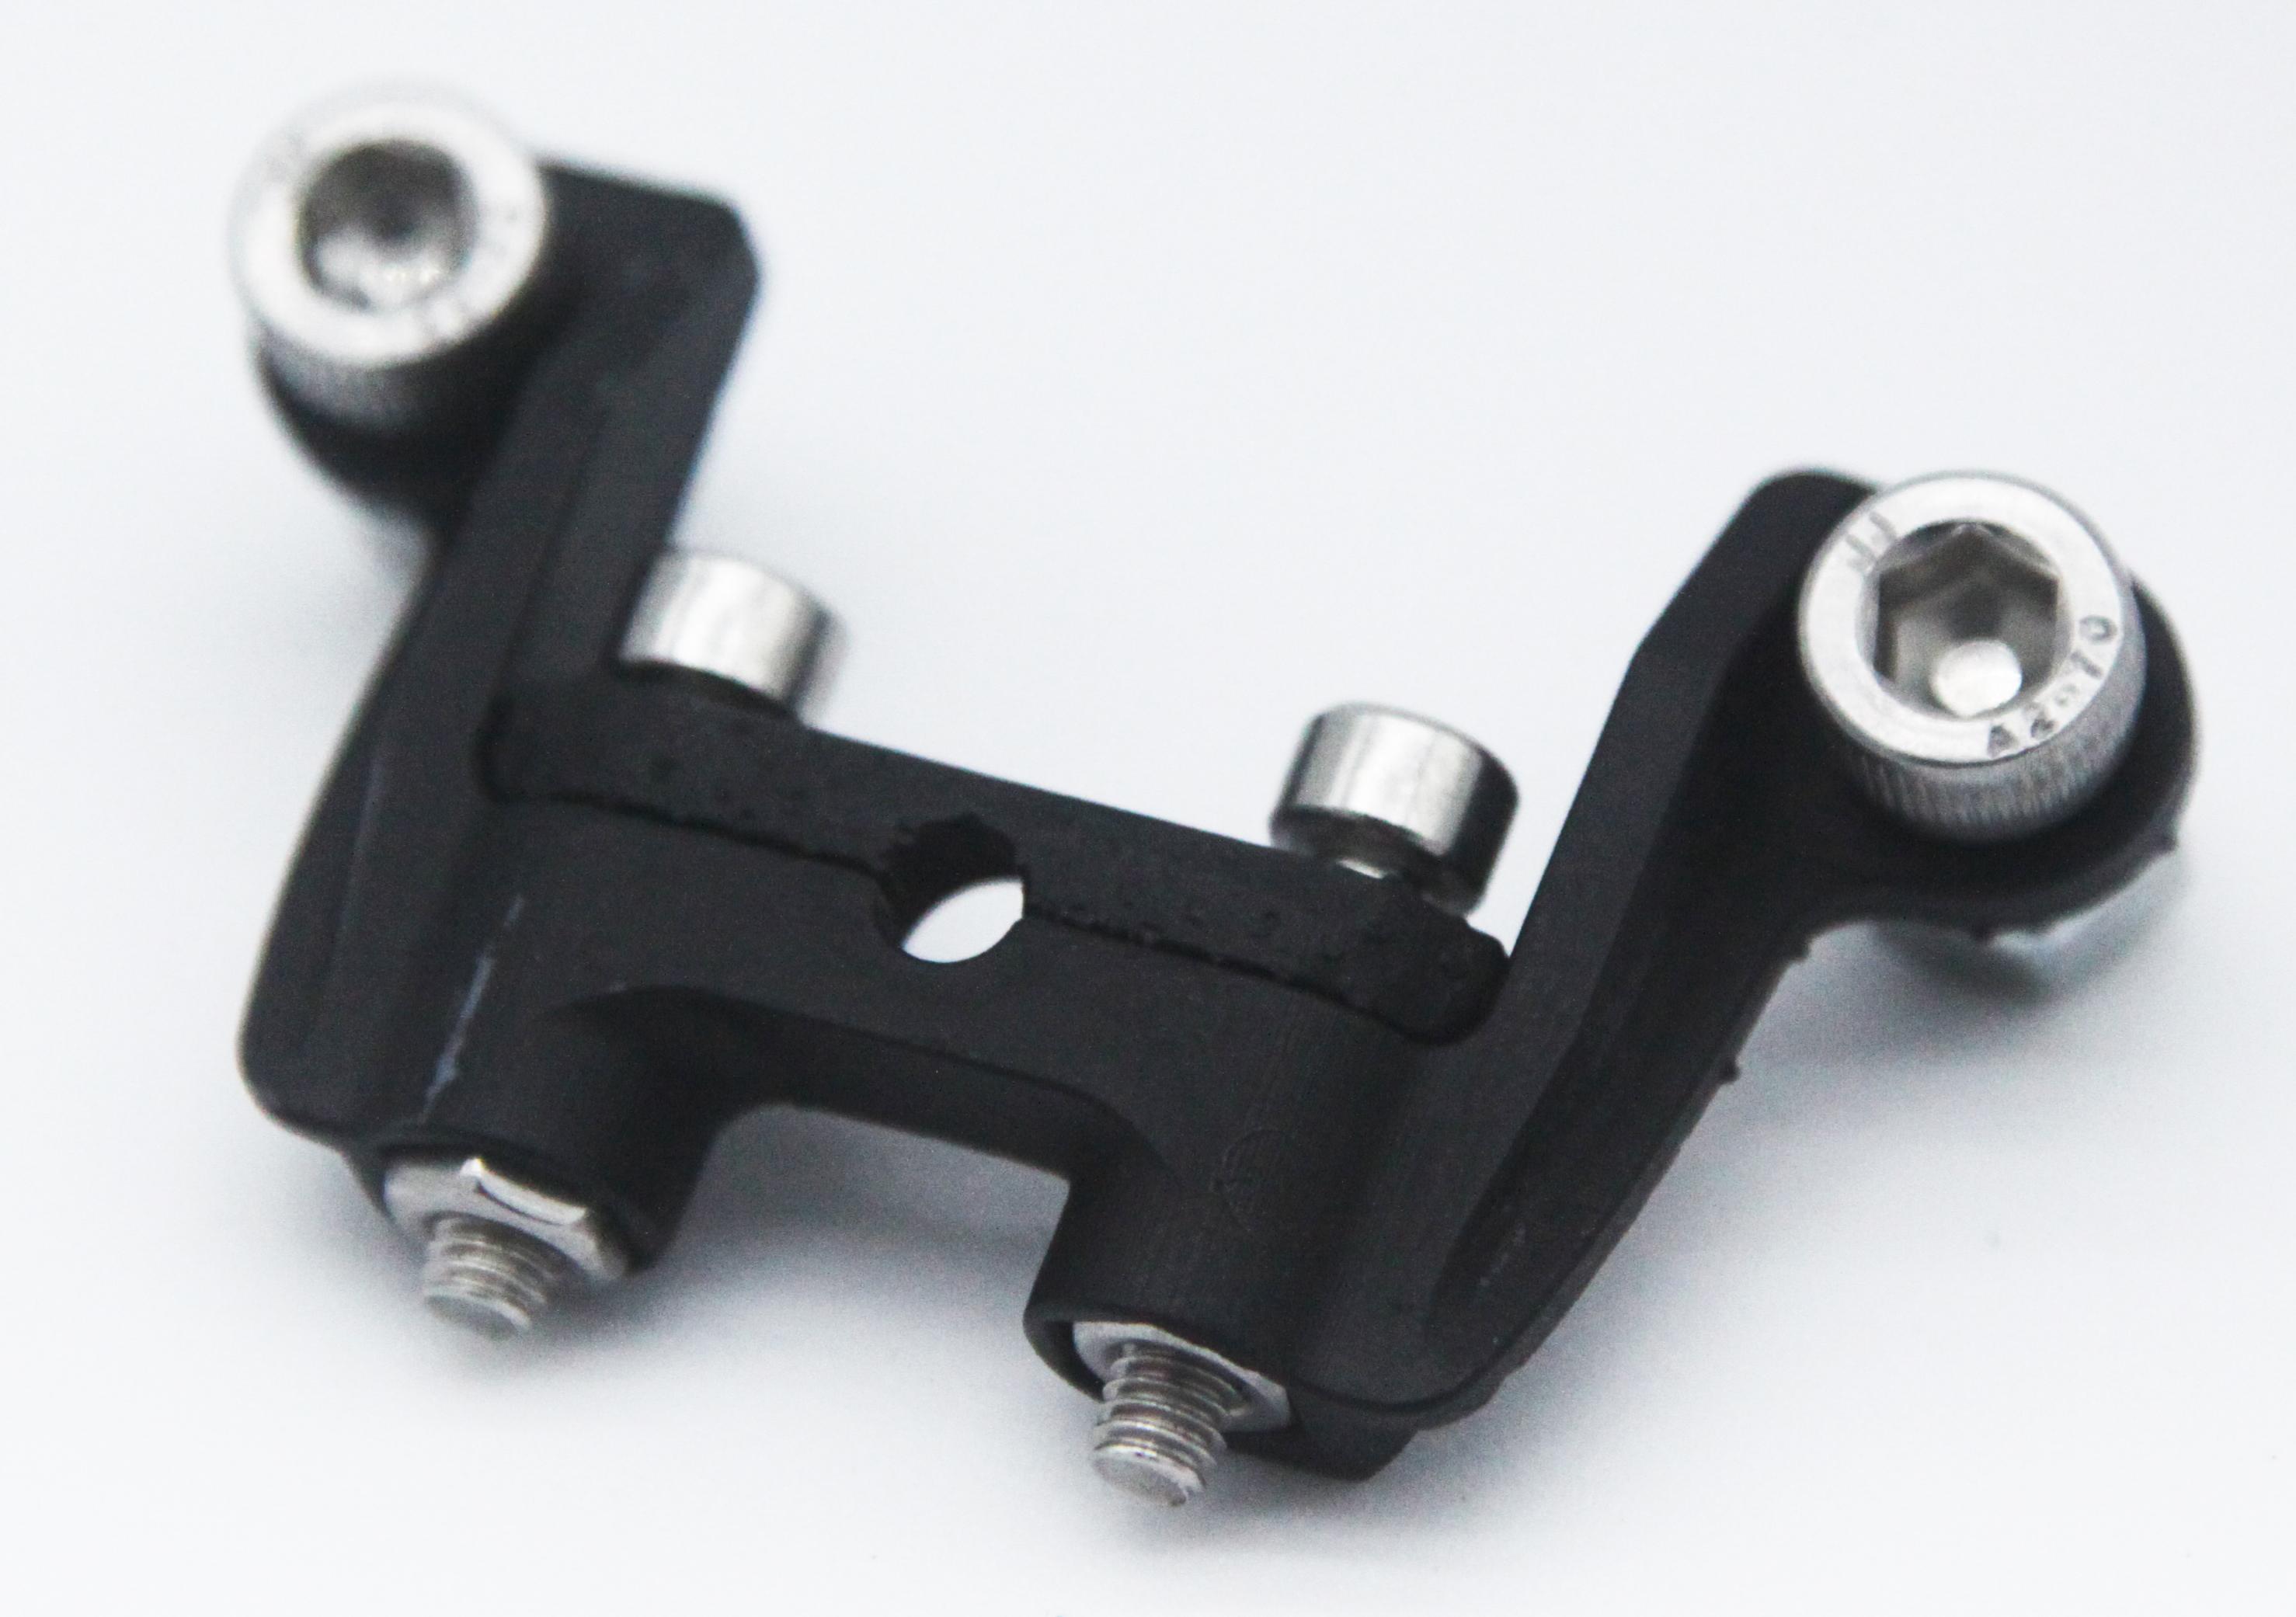 Rexy wheels usb clamp on its own